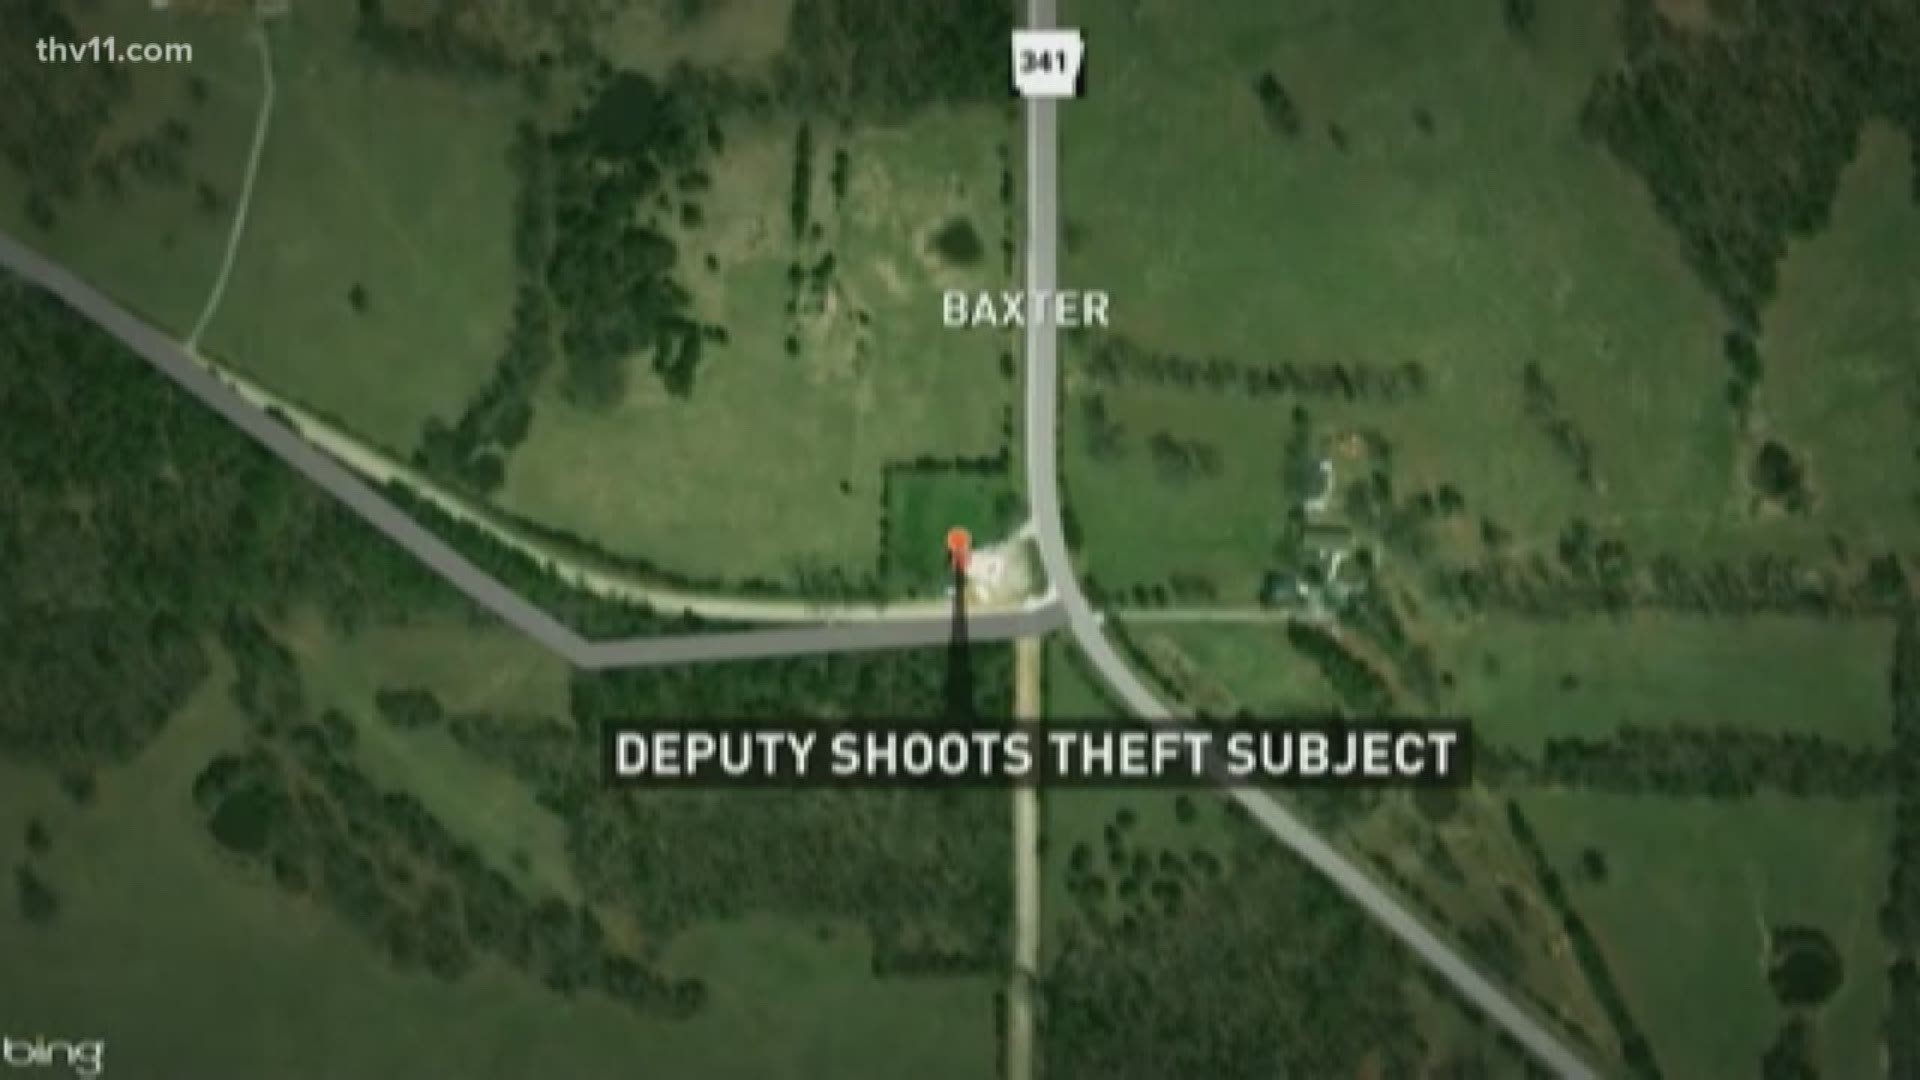 A Baxter County Deputy Sheriff shot a man Monday night in the Lone Rock area who was wanted for theft.